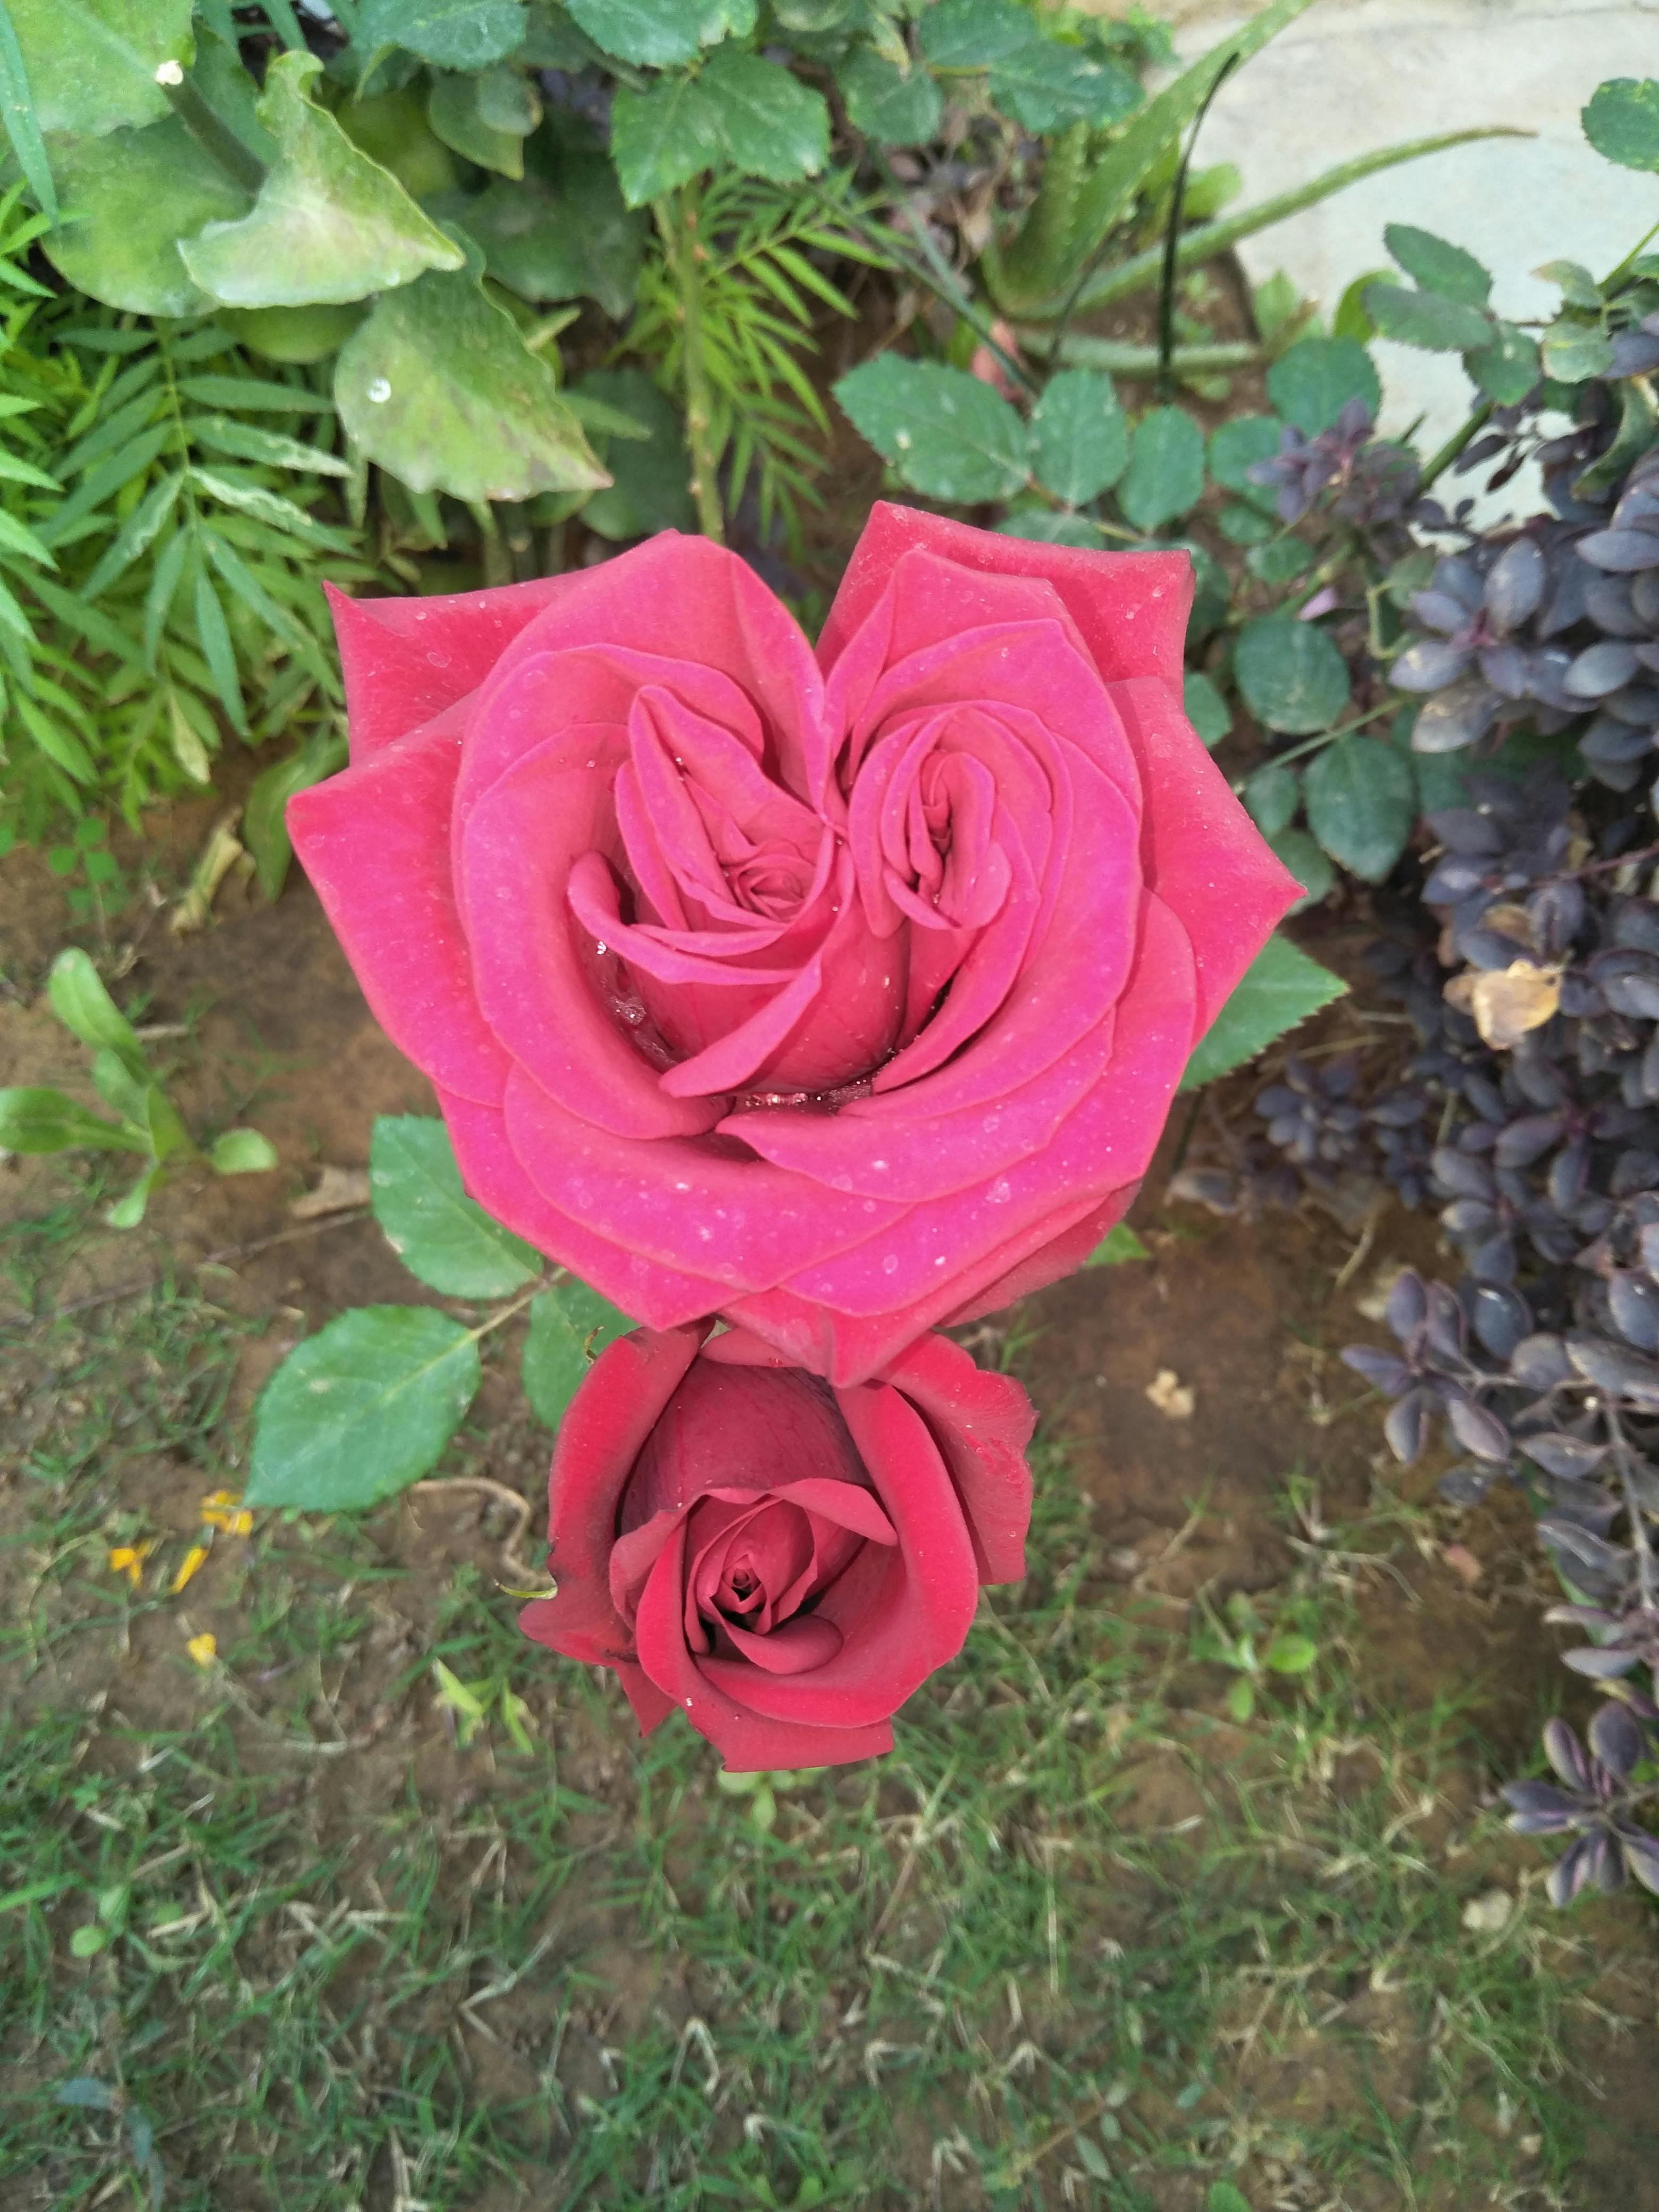 Free stock photo of Real Valentines Rose in My Garden